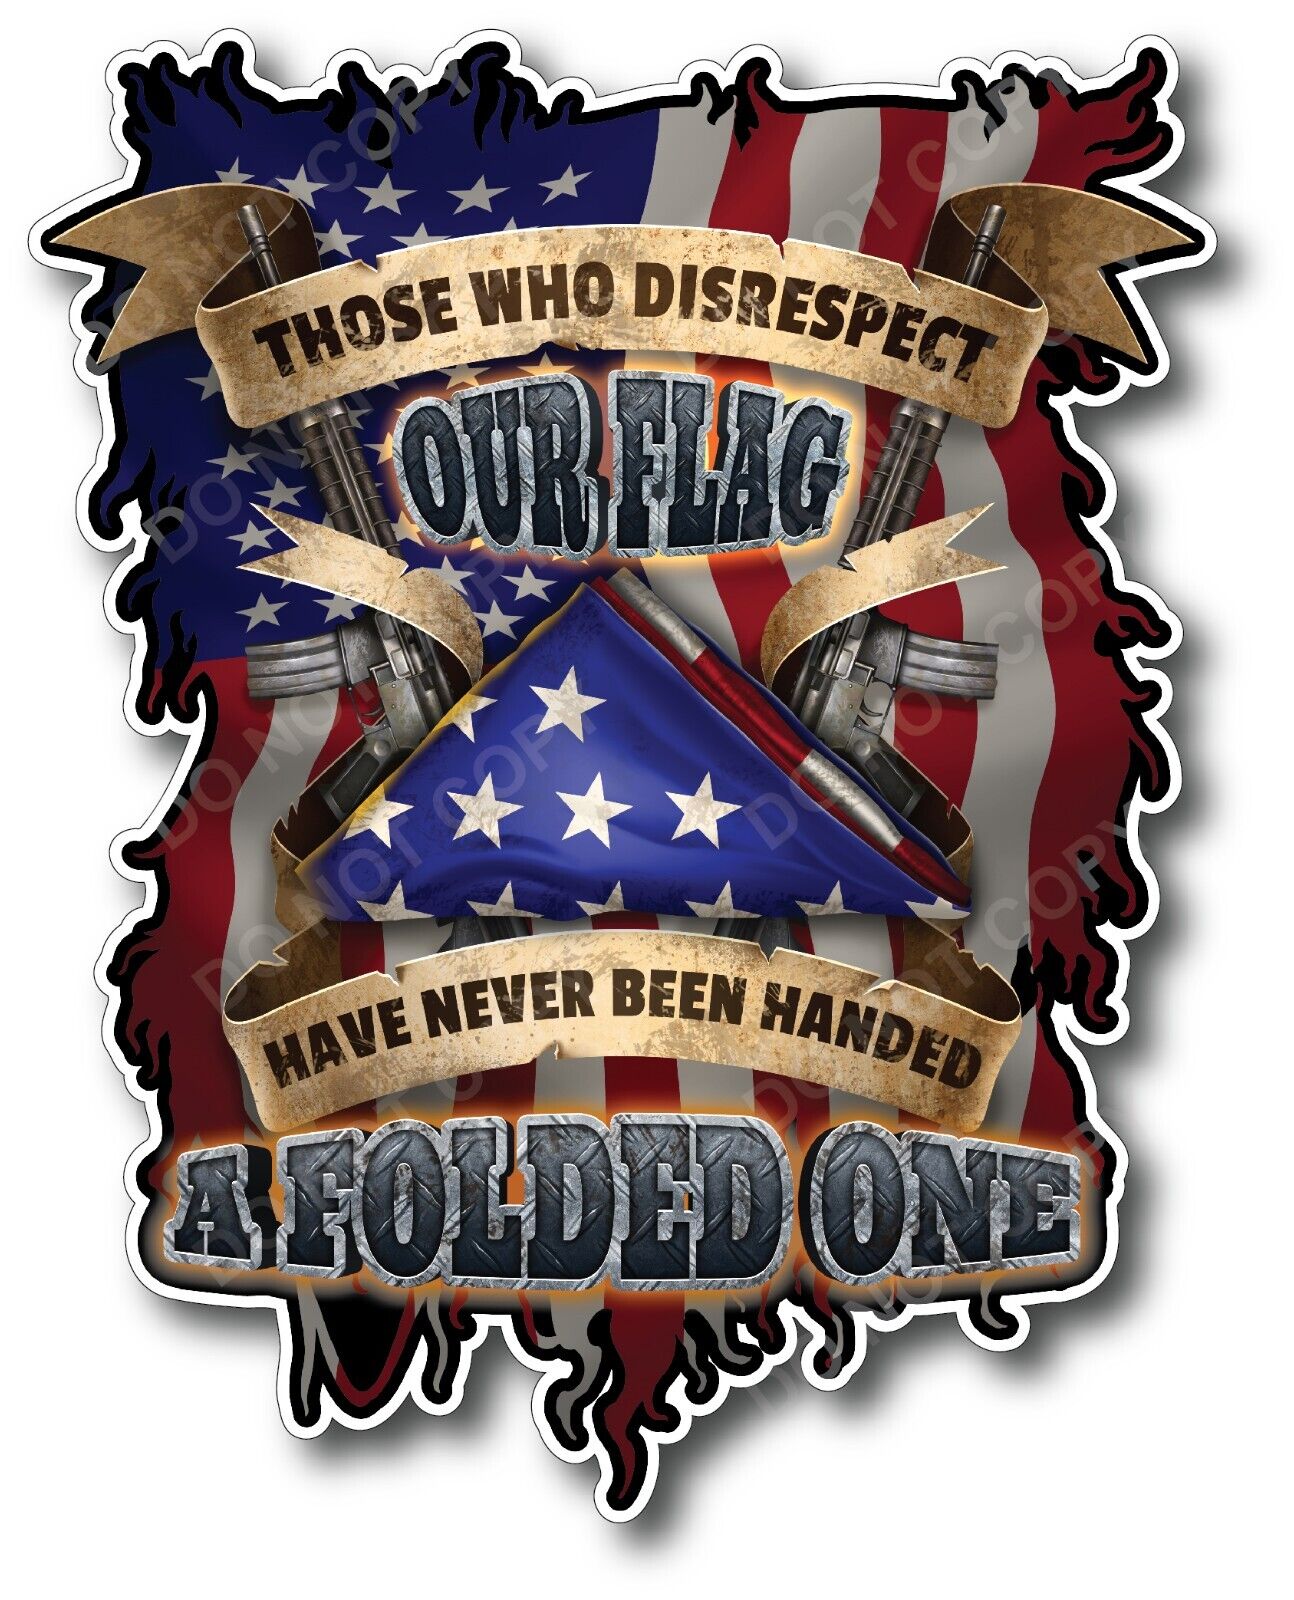 Never Been Handed Folded Flag Decal Sticker Cars Trucks Military Fallen Soldier